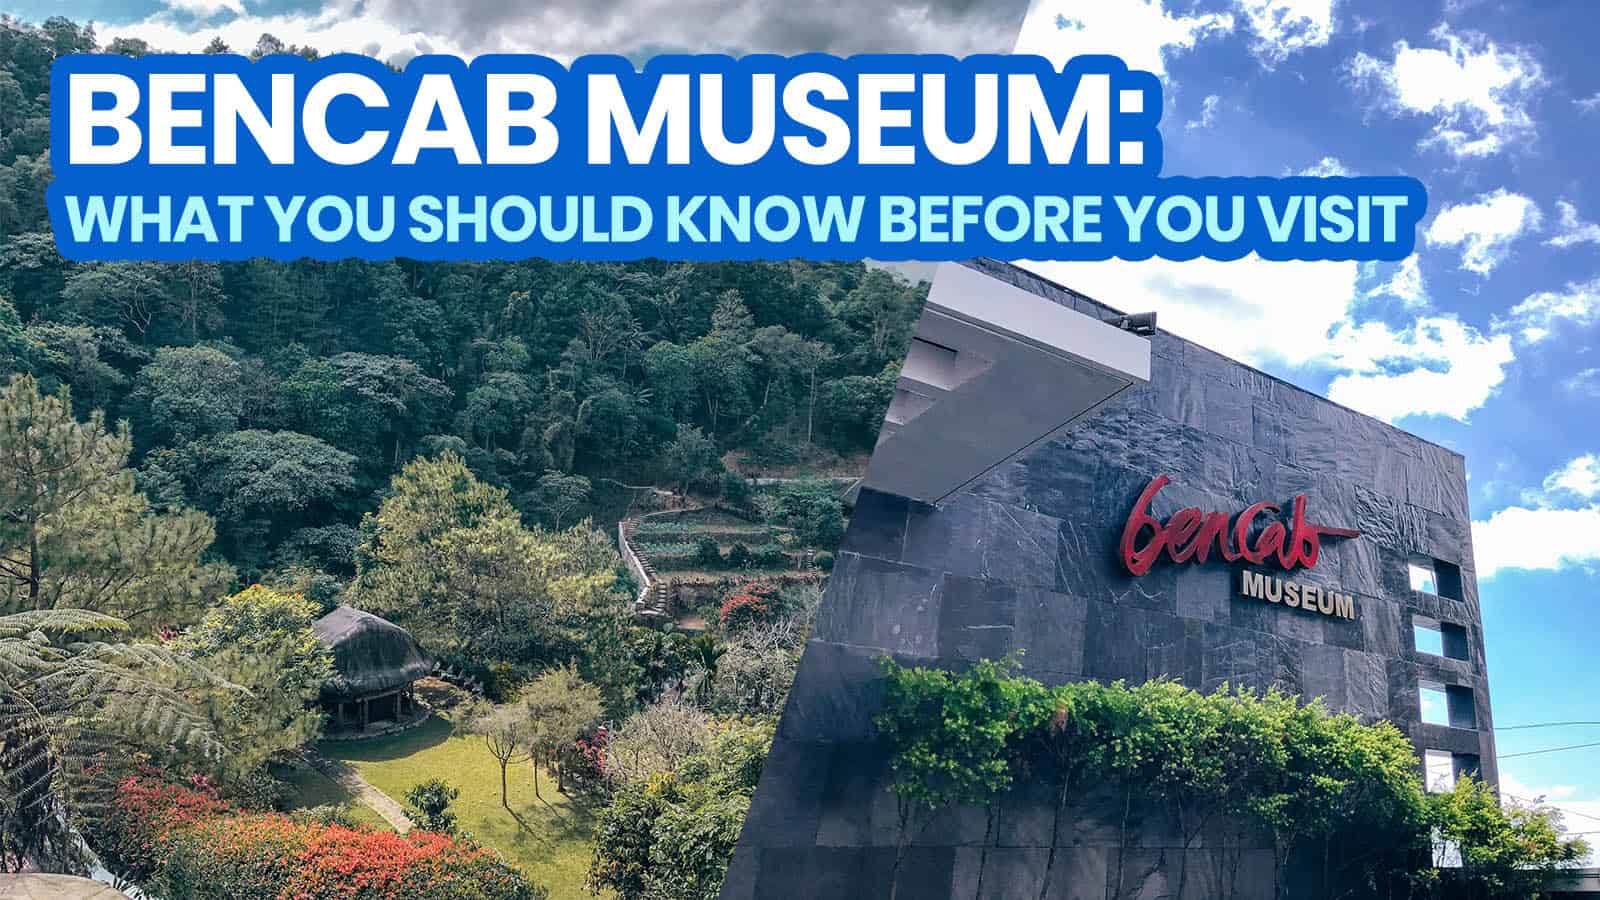 BENCAB MUSEUM: How to Get There from Baguio, Entrance Fee, Operating Hours